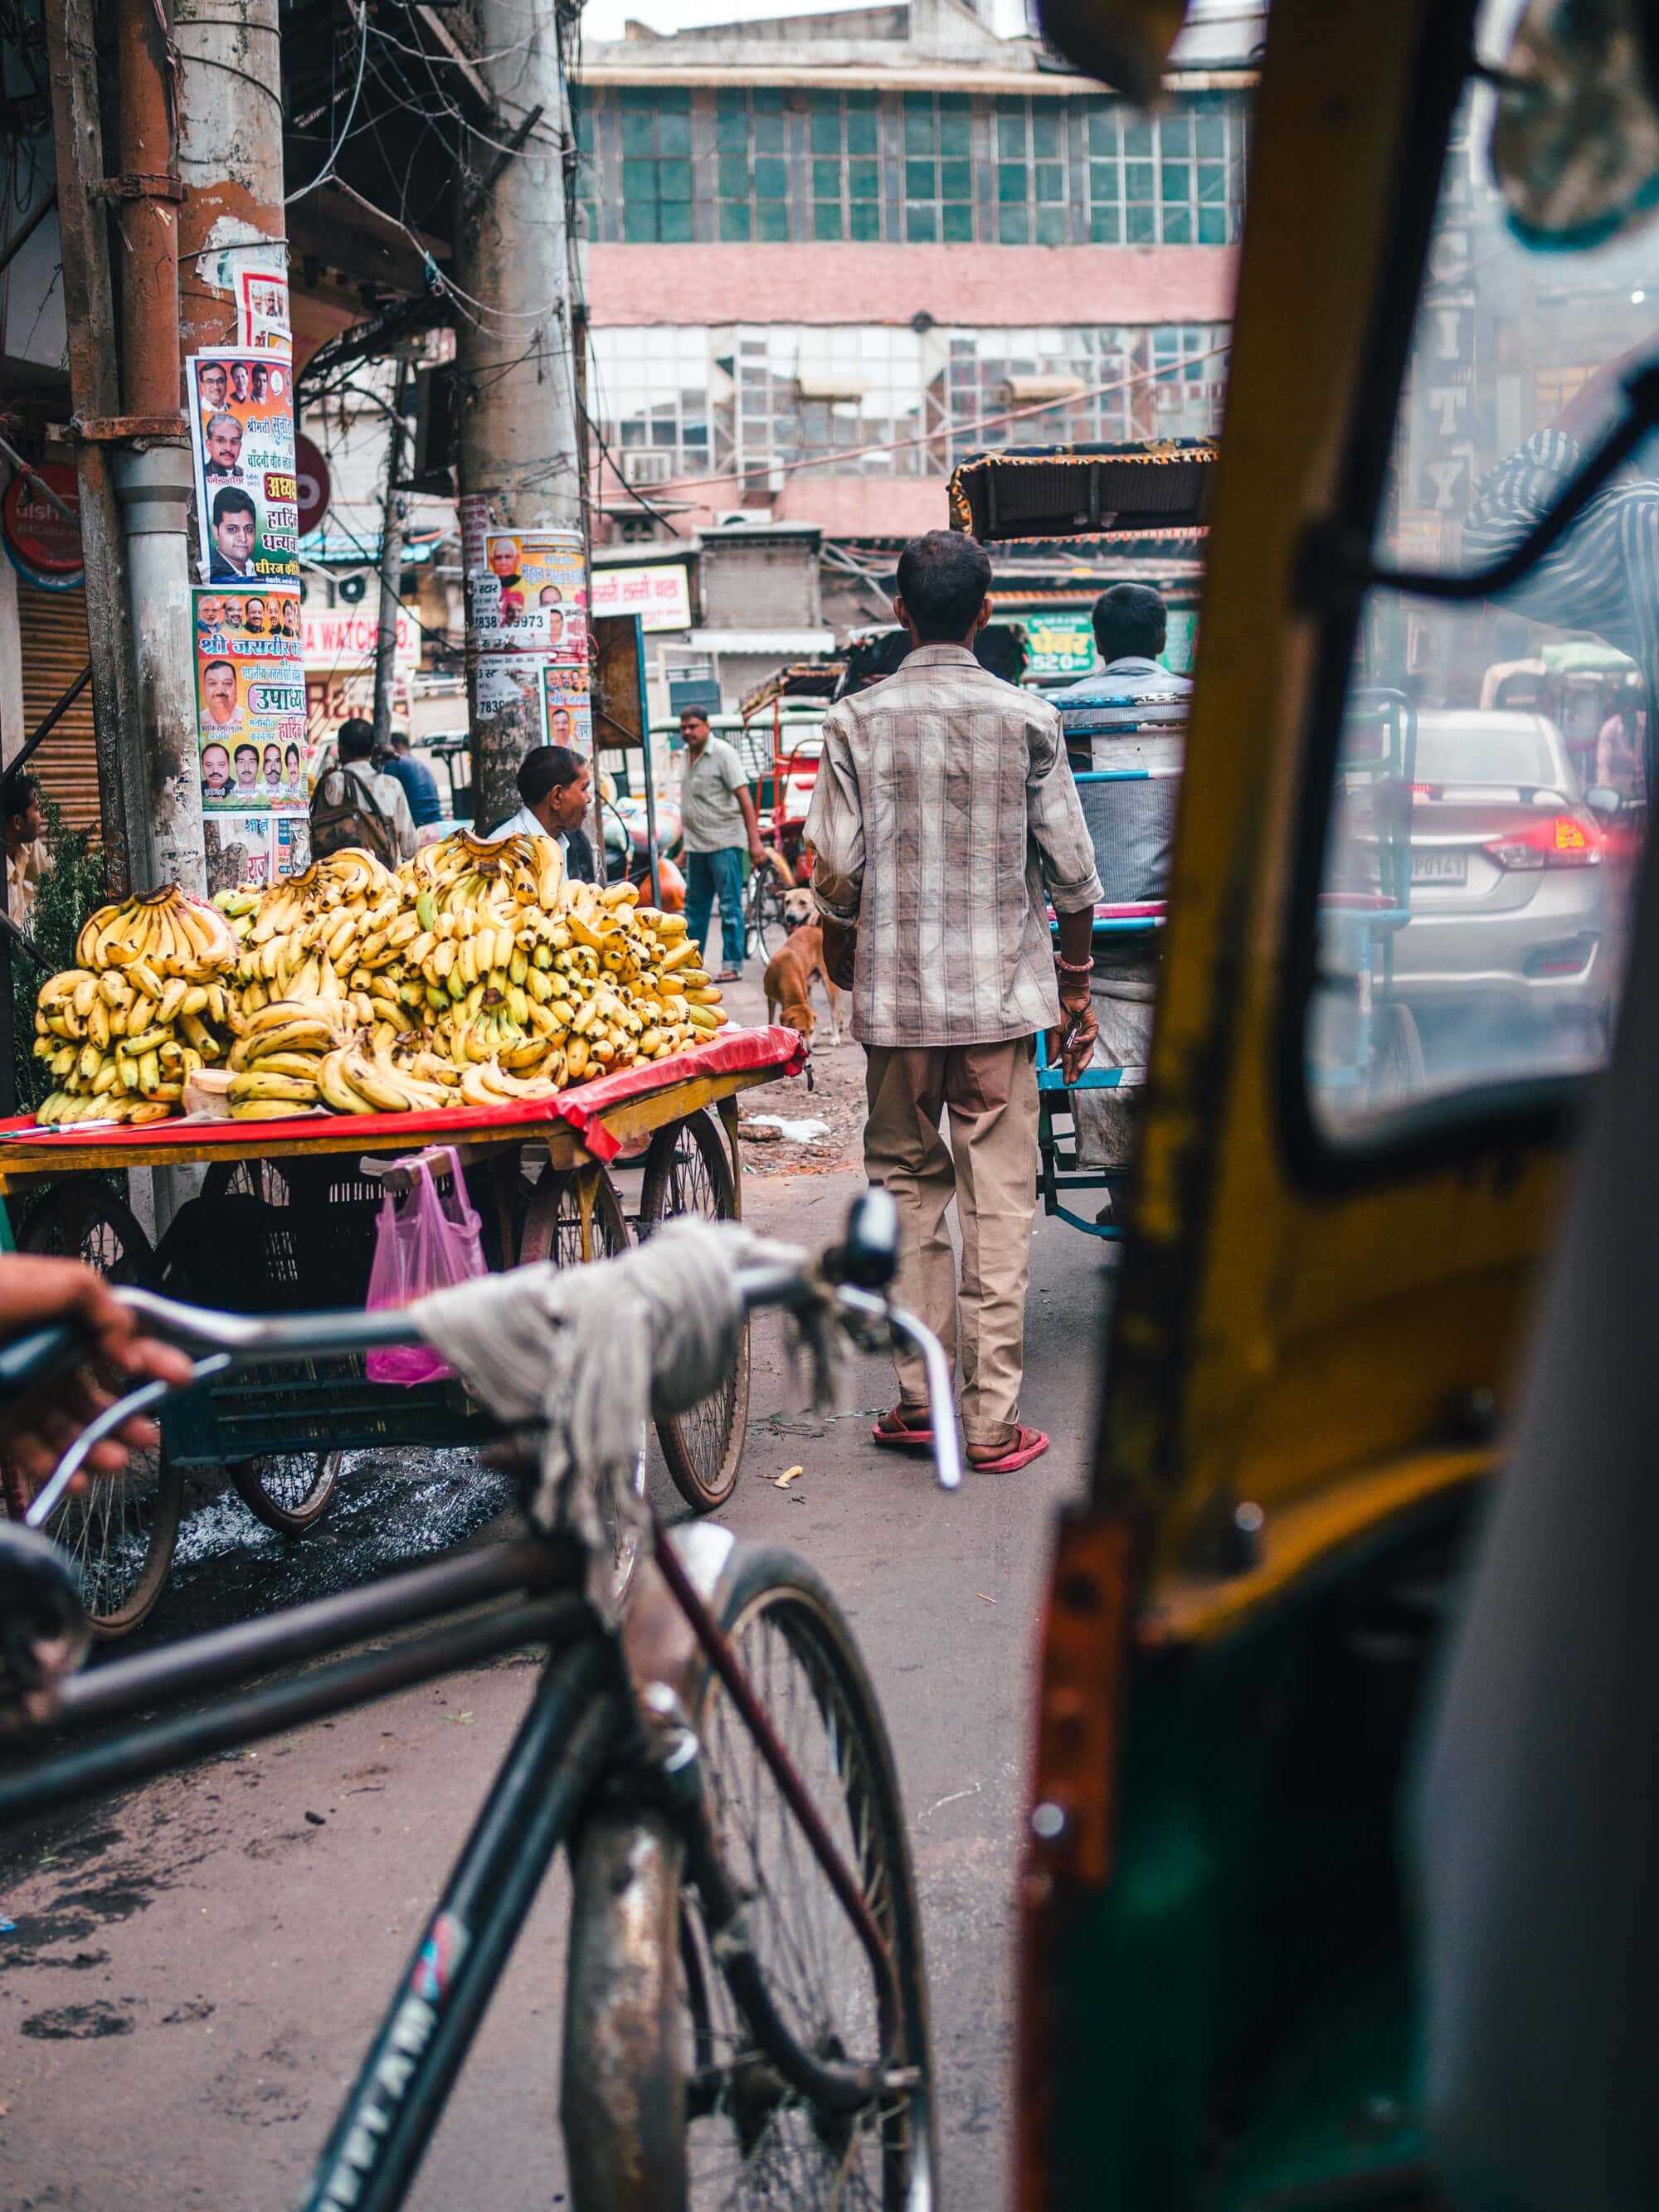 A first timer's guide to Delhi, India - Crazy traffic of Old Delhi